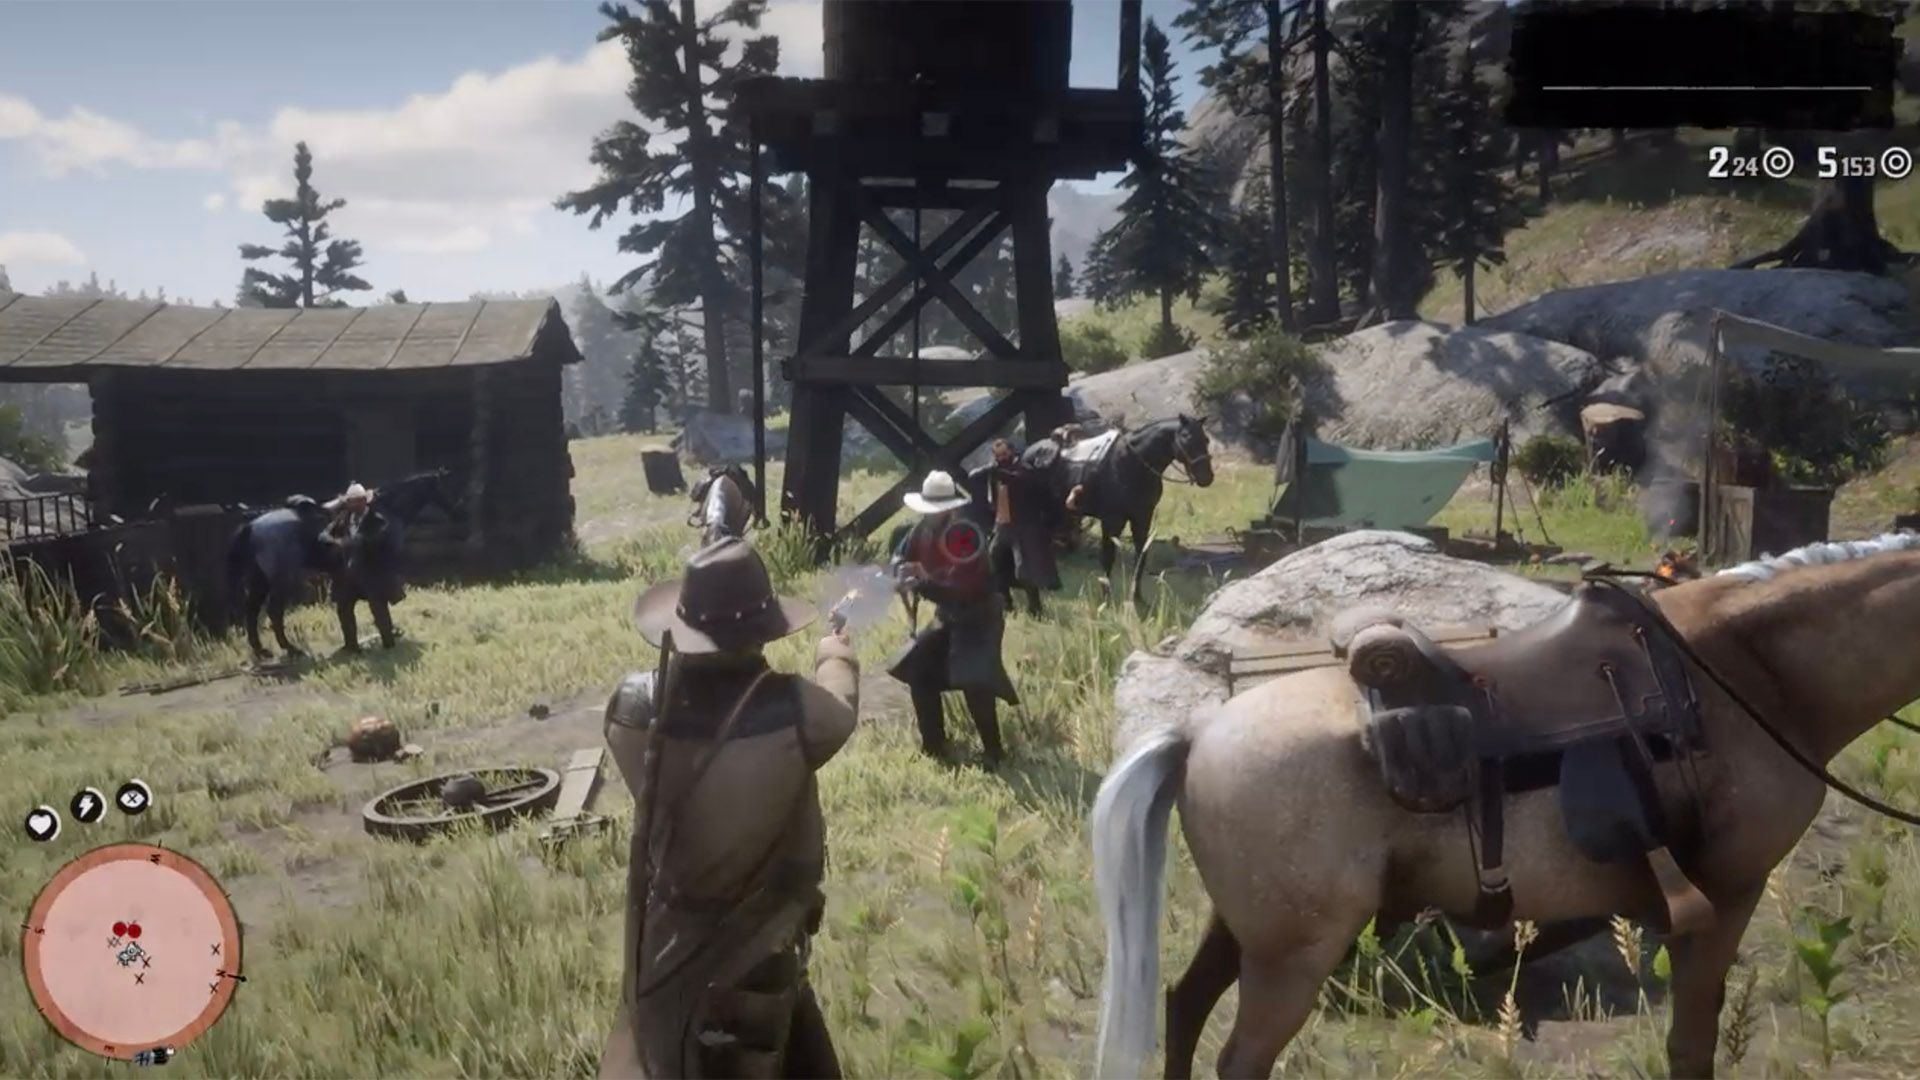 watch-the-new-red-dead-redemption-2-gameplay-trailer-here-vg247